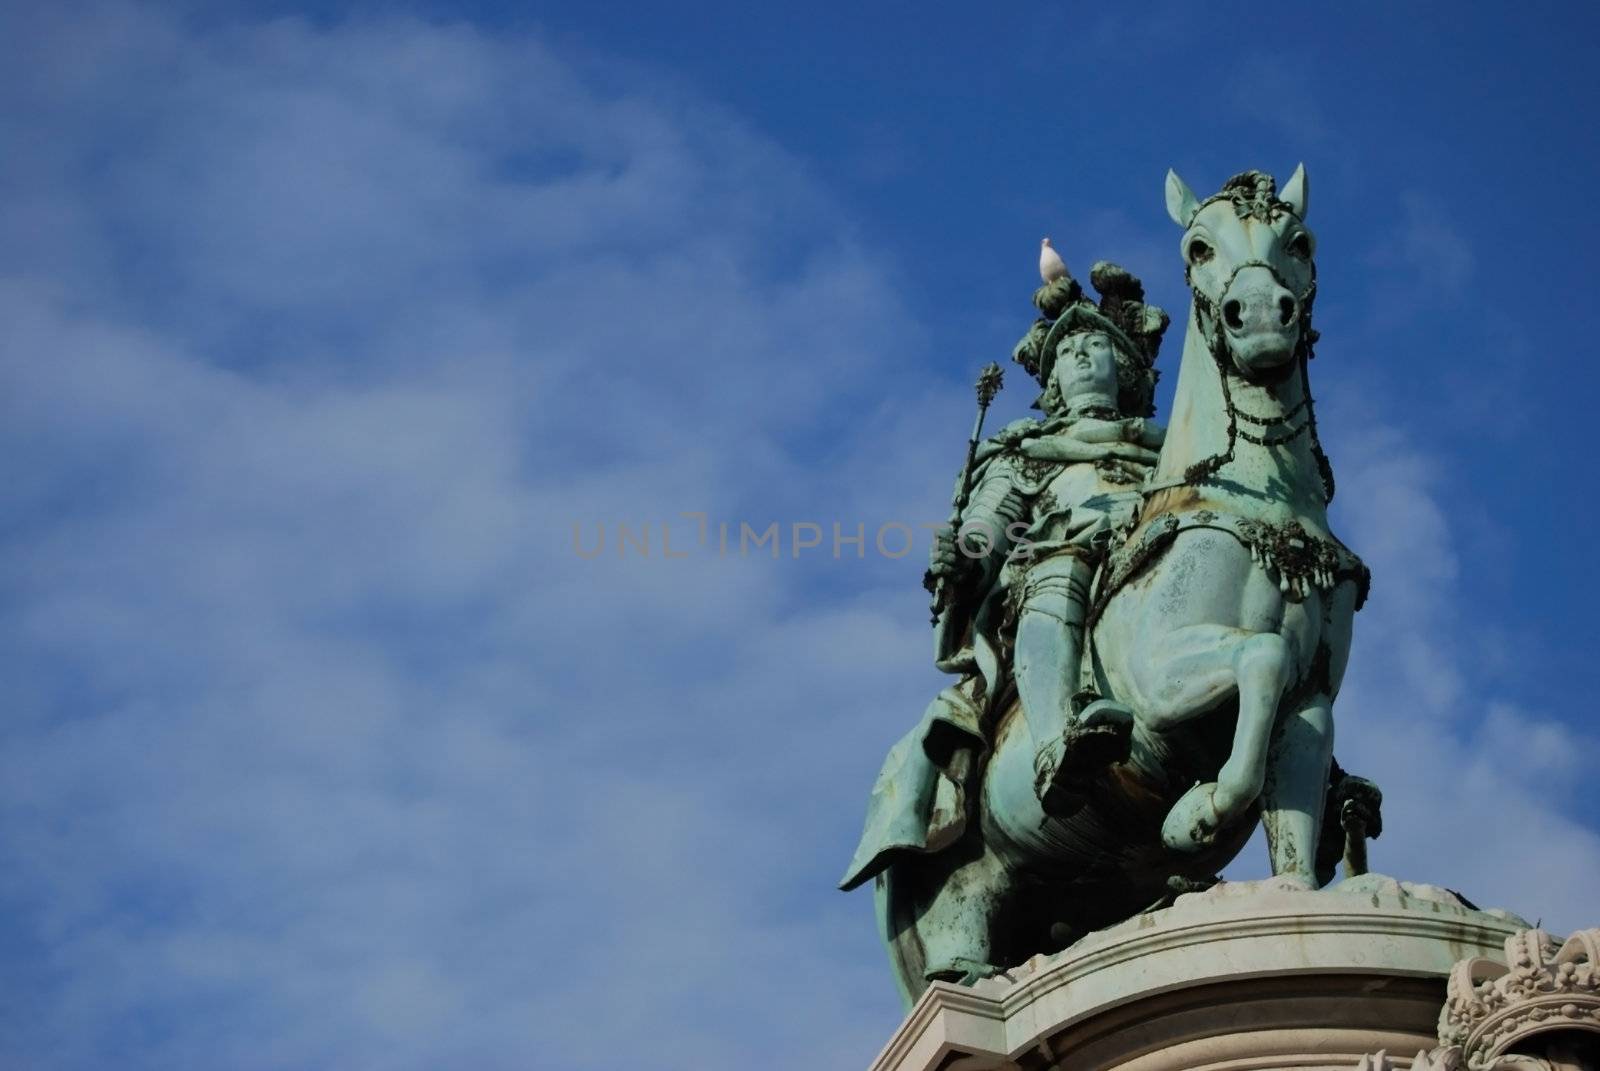 monument of the portuguese king Dom Jose I. at the Praca do Comercio in Lisbon, Portugal with a dove on his head